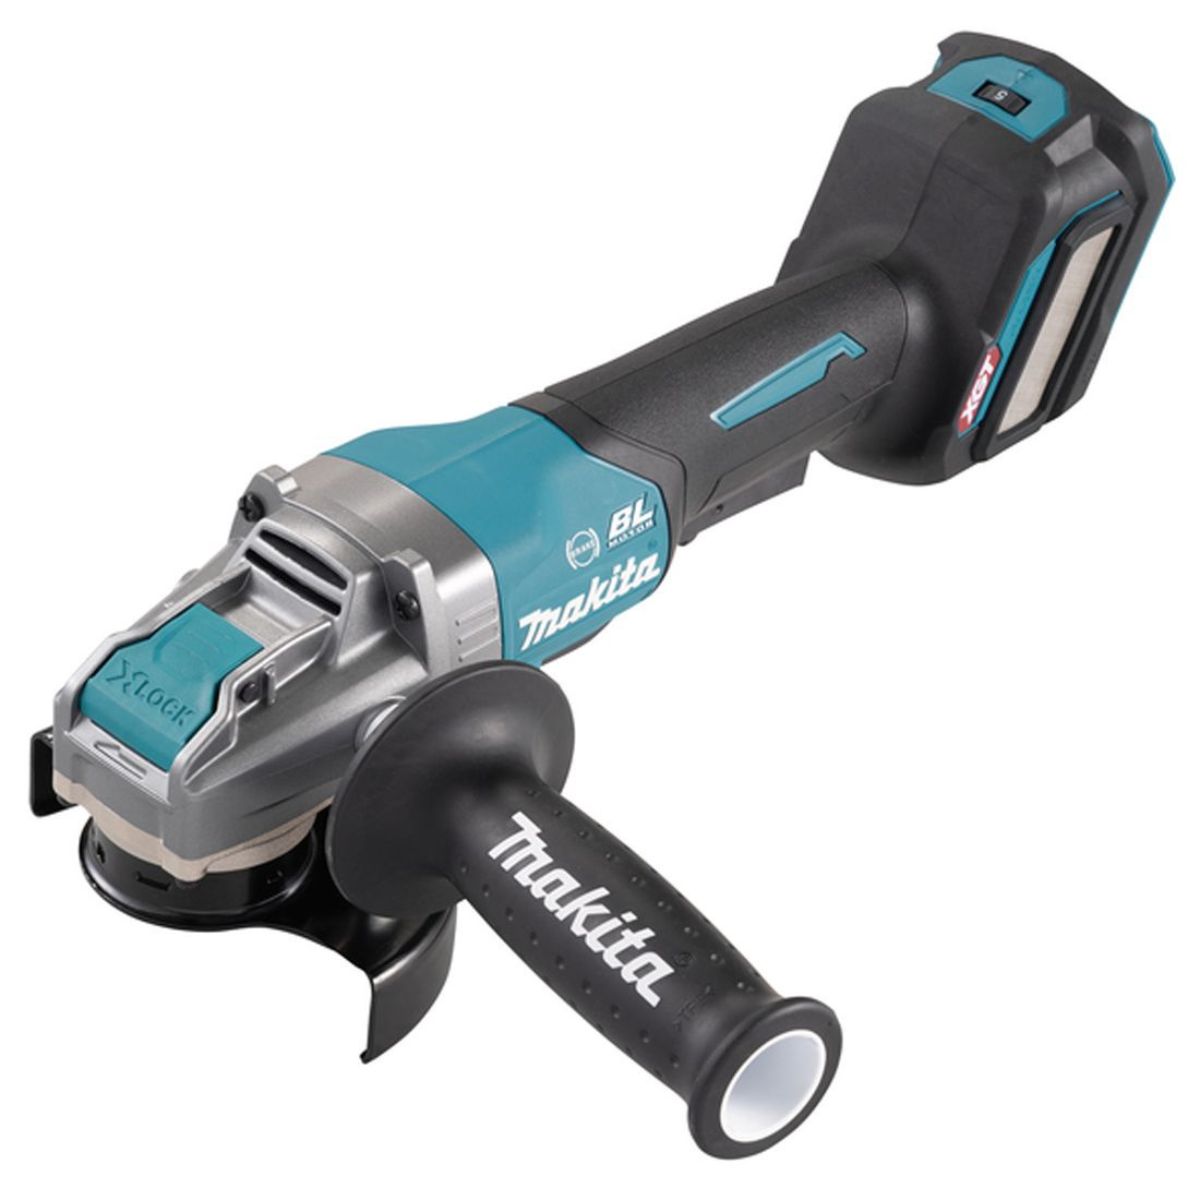 Makita GA043GZ02 40v XGT Max 115mm Brushless Angle Grinder Body Only With Carry Case